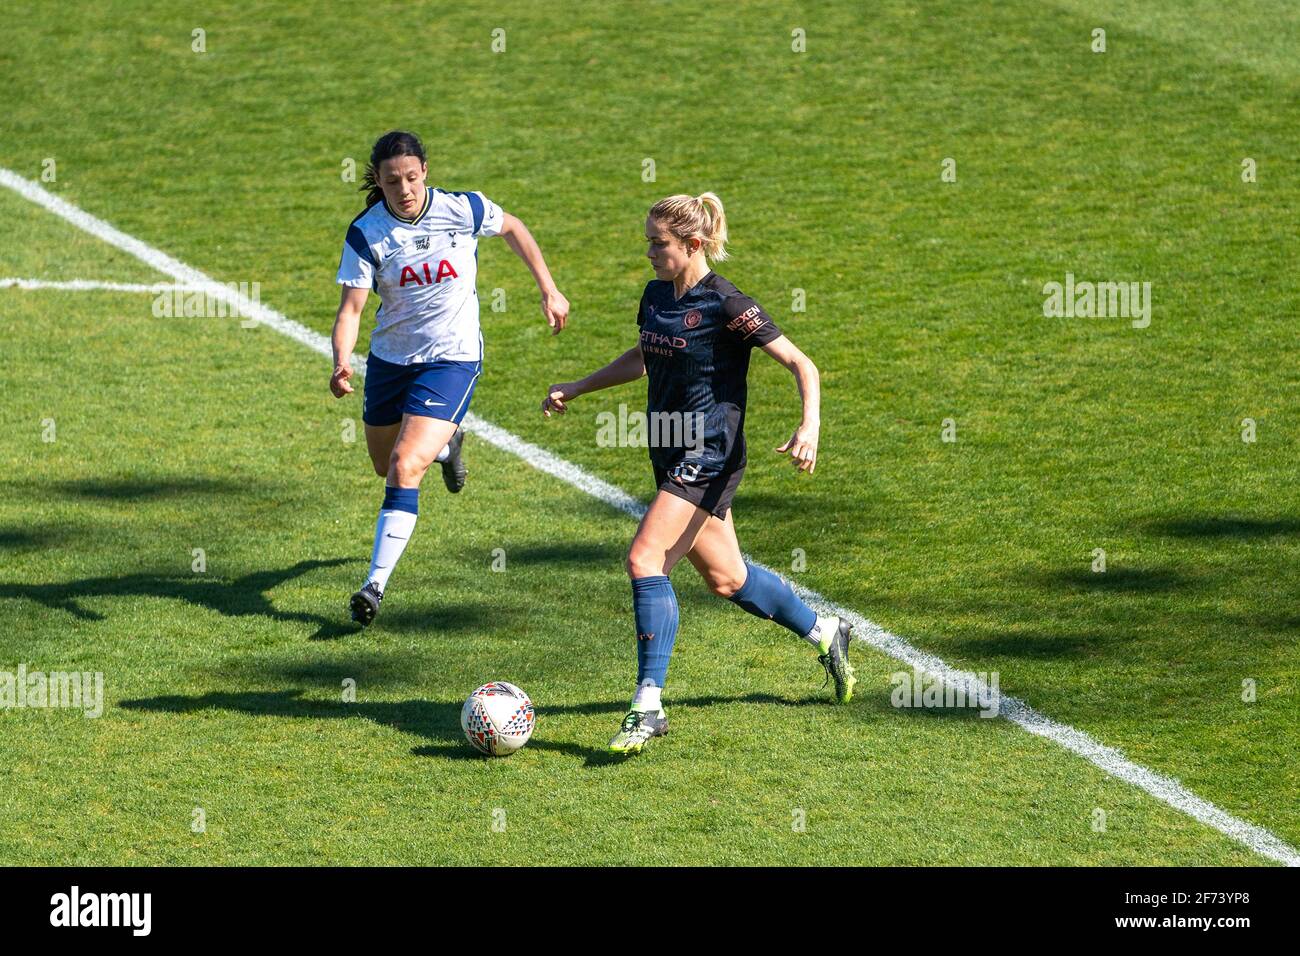 London, UK. 04th Apr, 2021. Rachel Williams (#10 Tottenham) and Abby Dahlkemper (#13 Manchester City) during the Barclays FA Womens Super League game between Tottenham Hotspur and Manchester City at The Hive, in London, England. Credit: SPP Sport Press Photo. /Alamy Live News Stock Photo